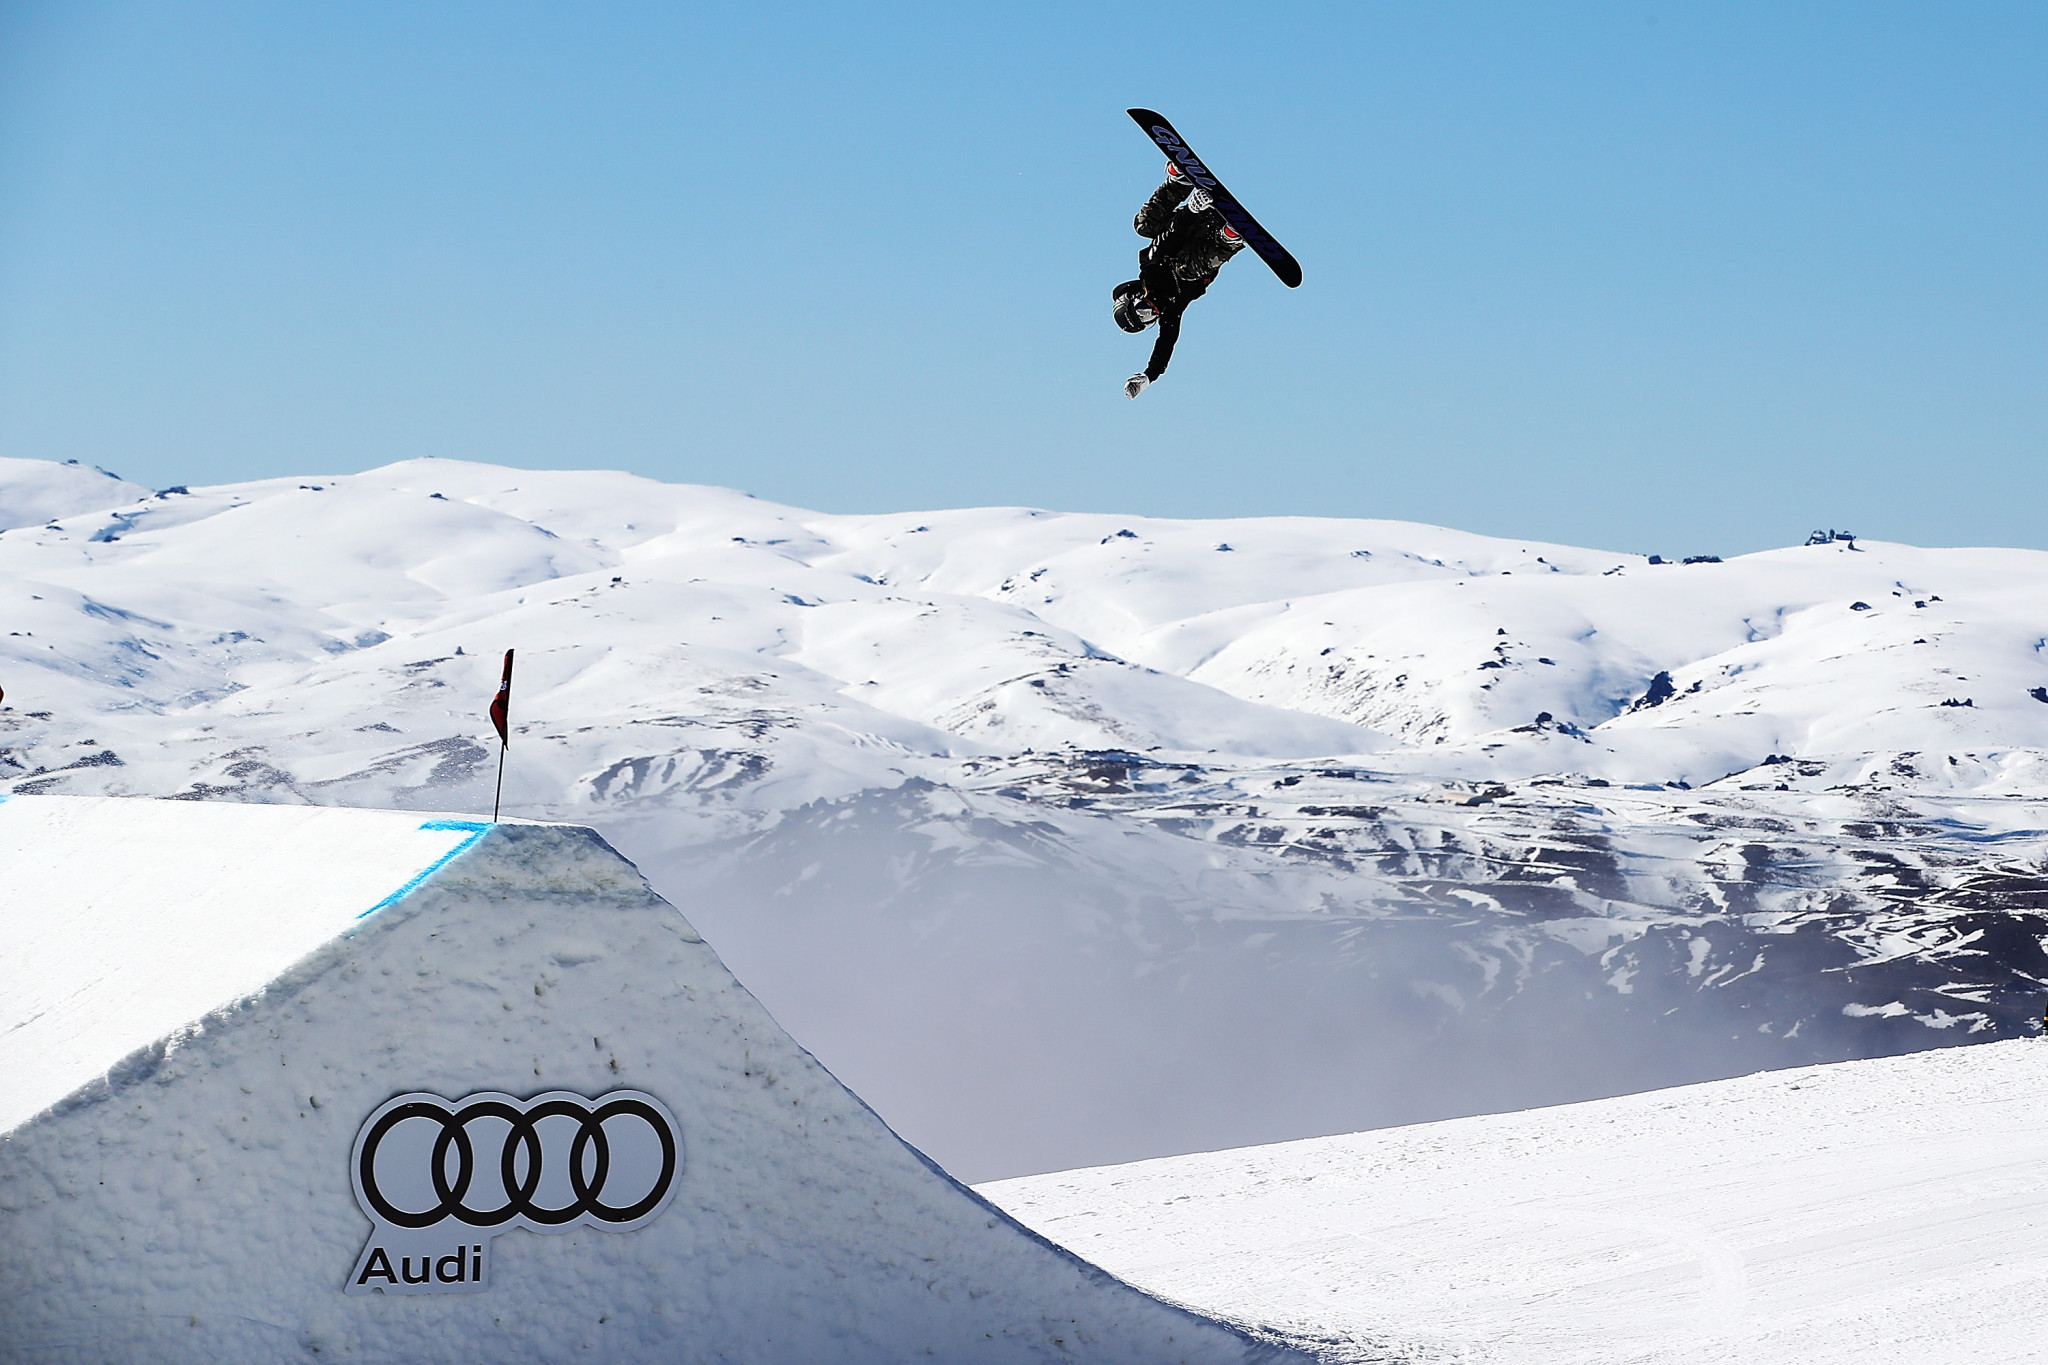 Olympic champion Anderson wins FIS Snowboard Slopestyle World Cup in New Zealand